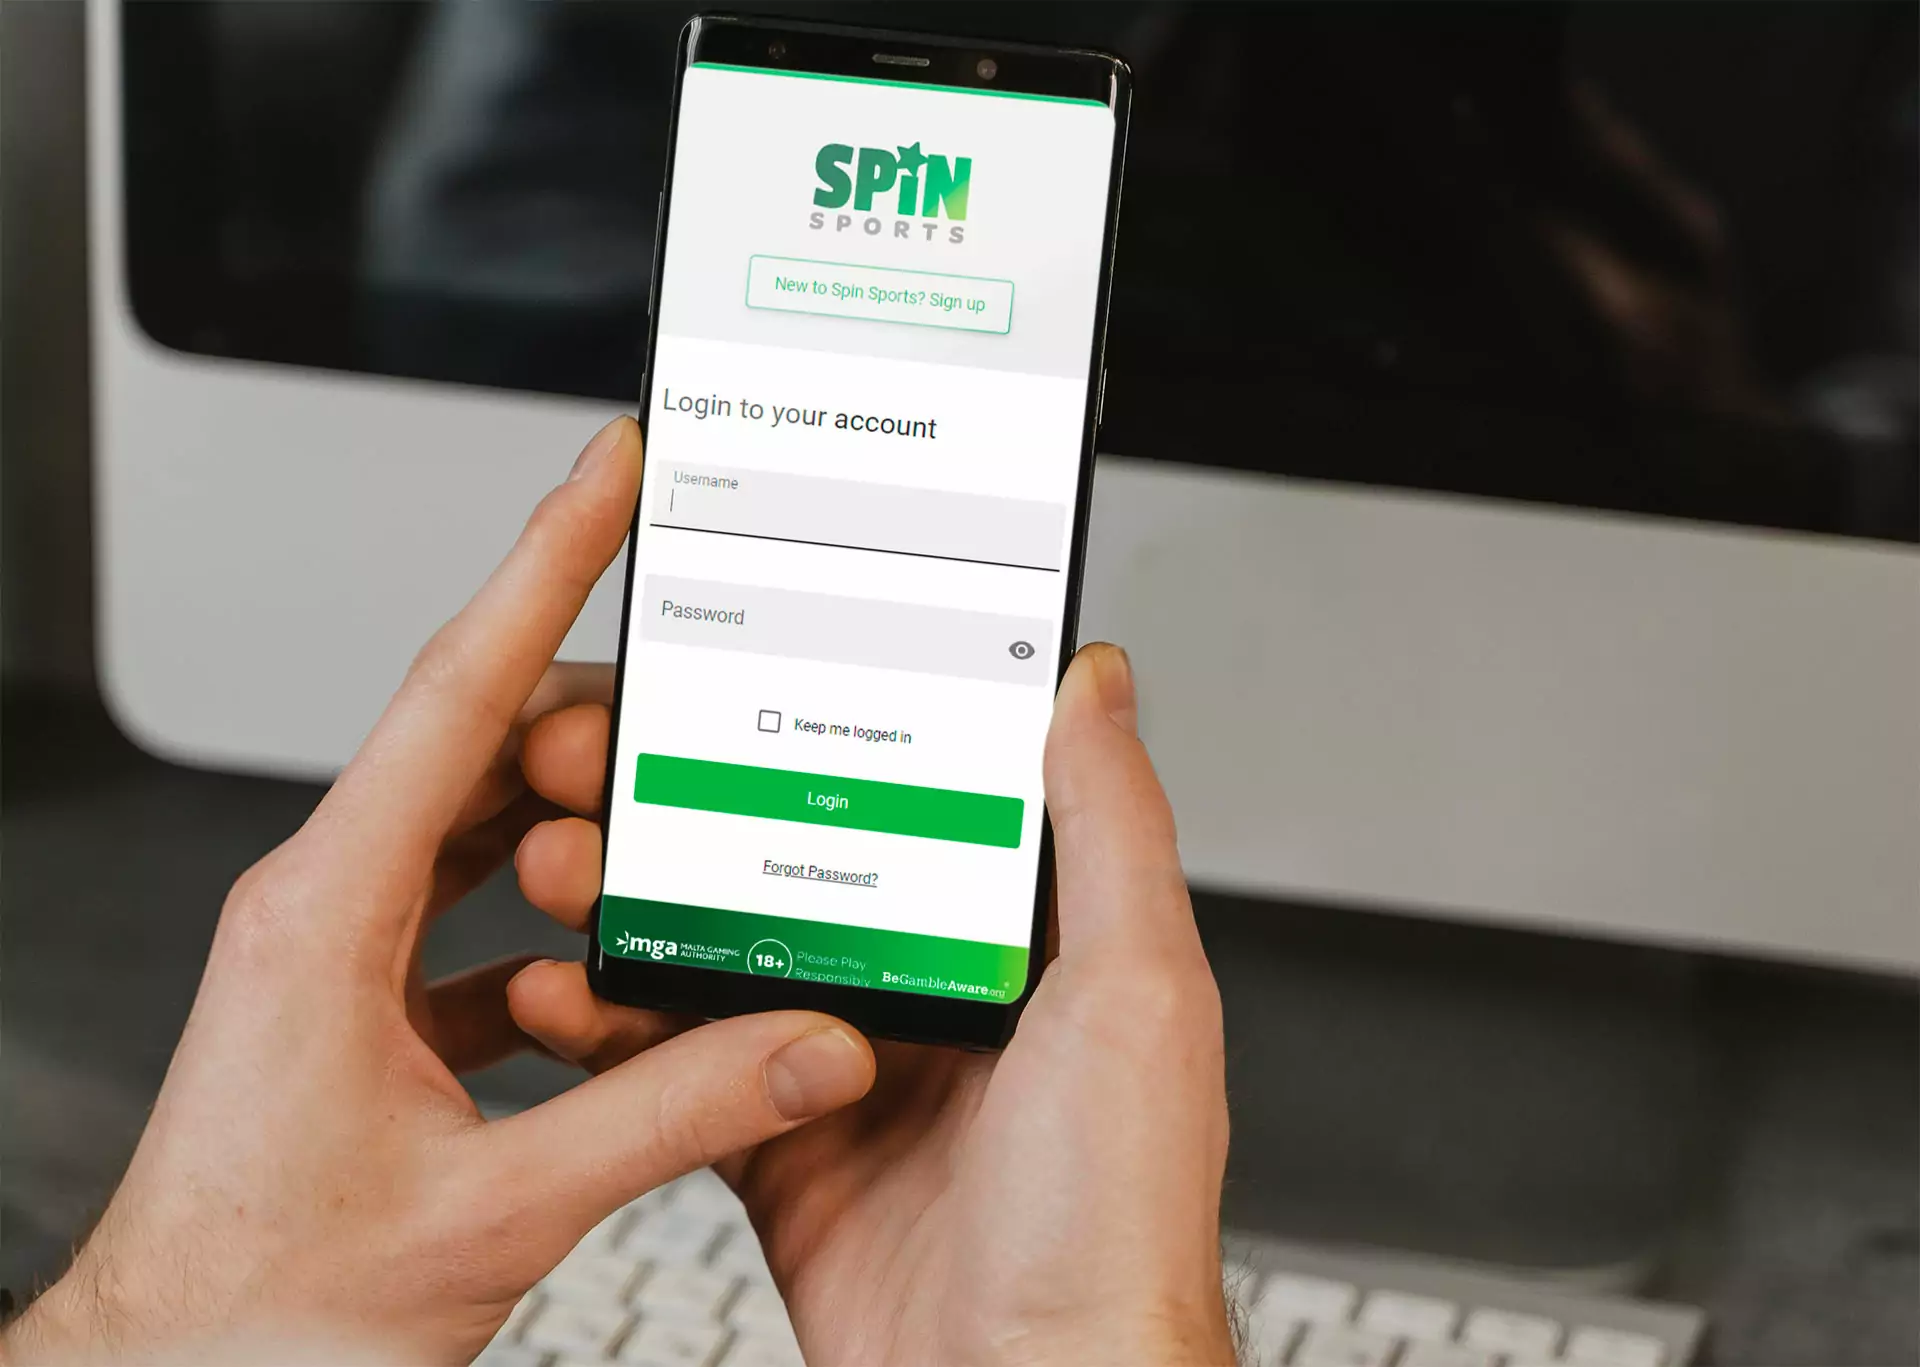 You can use your email or username and a password to log in to the Spin Sports app.